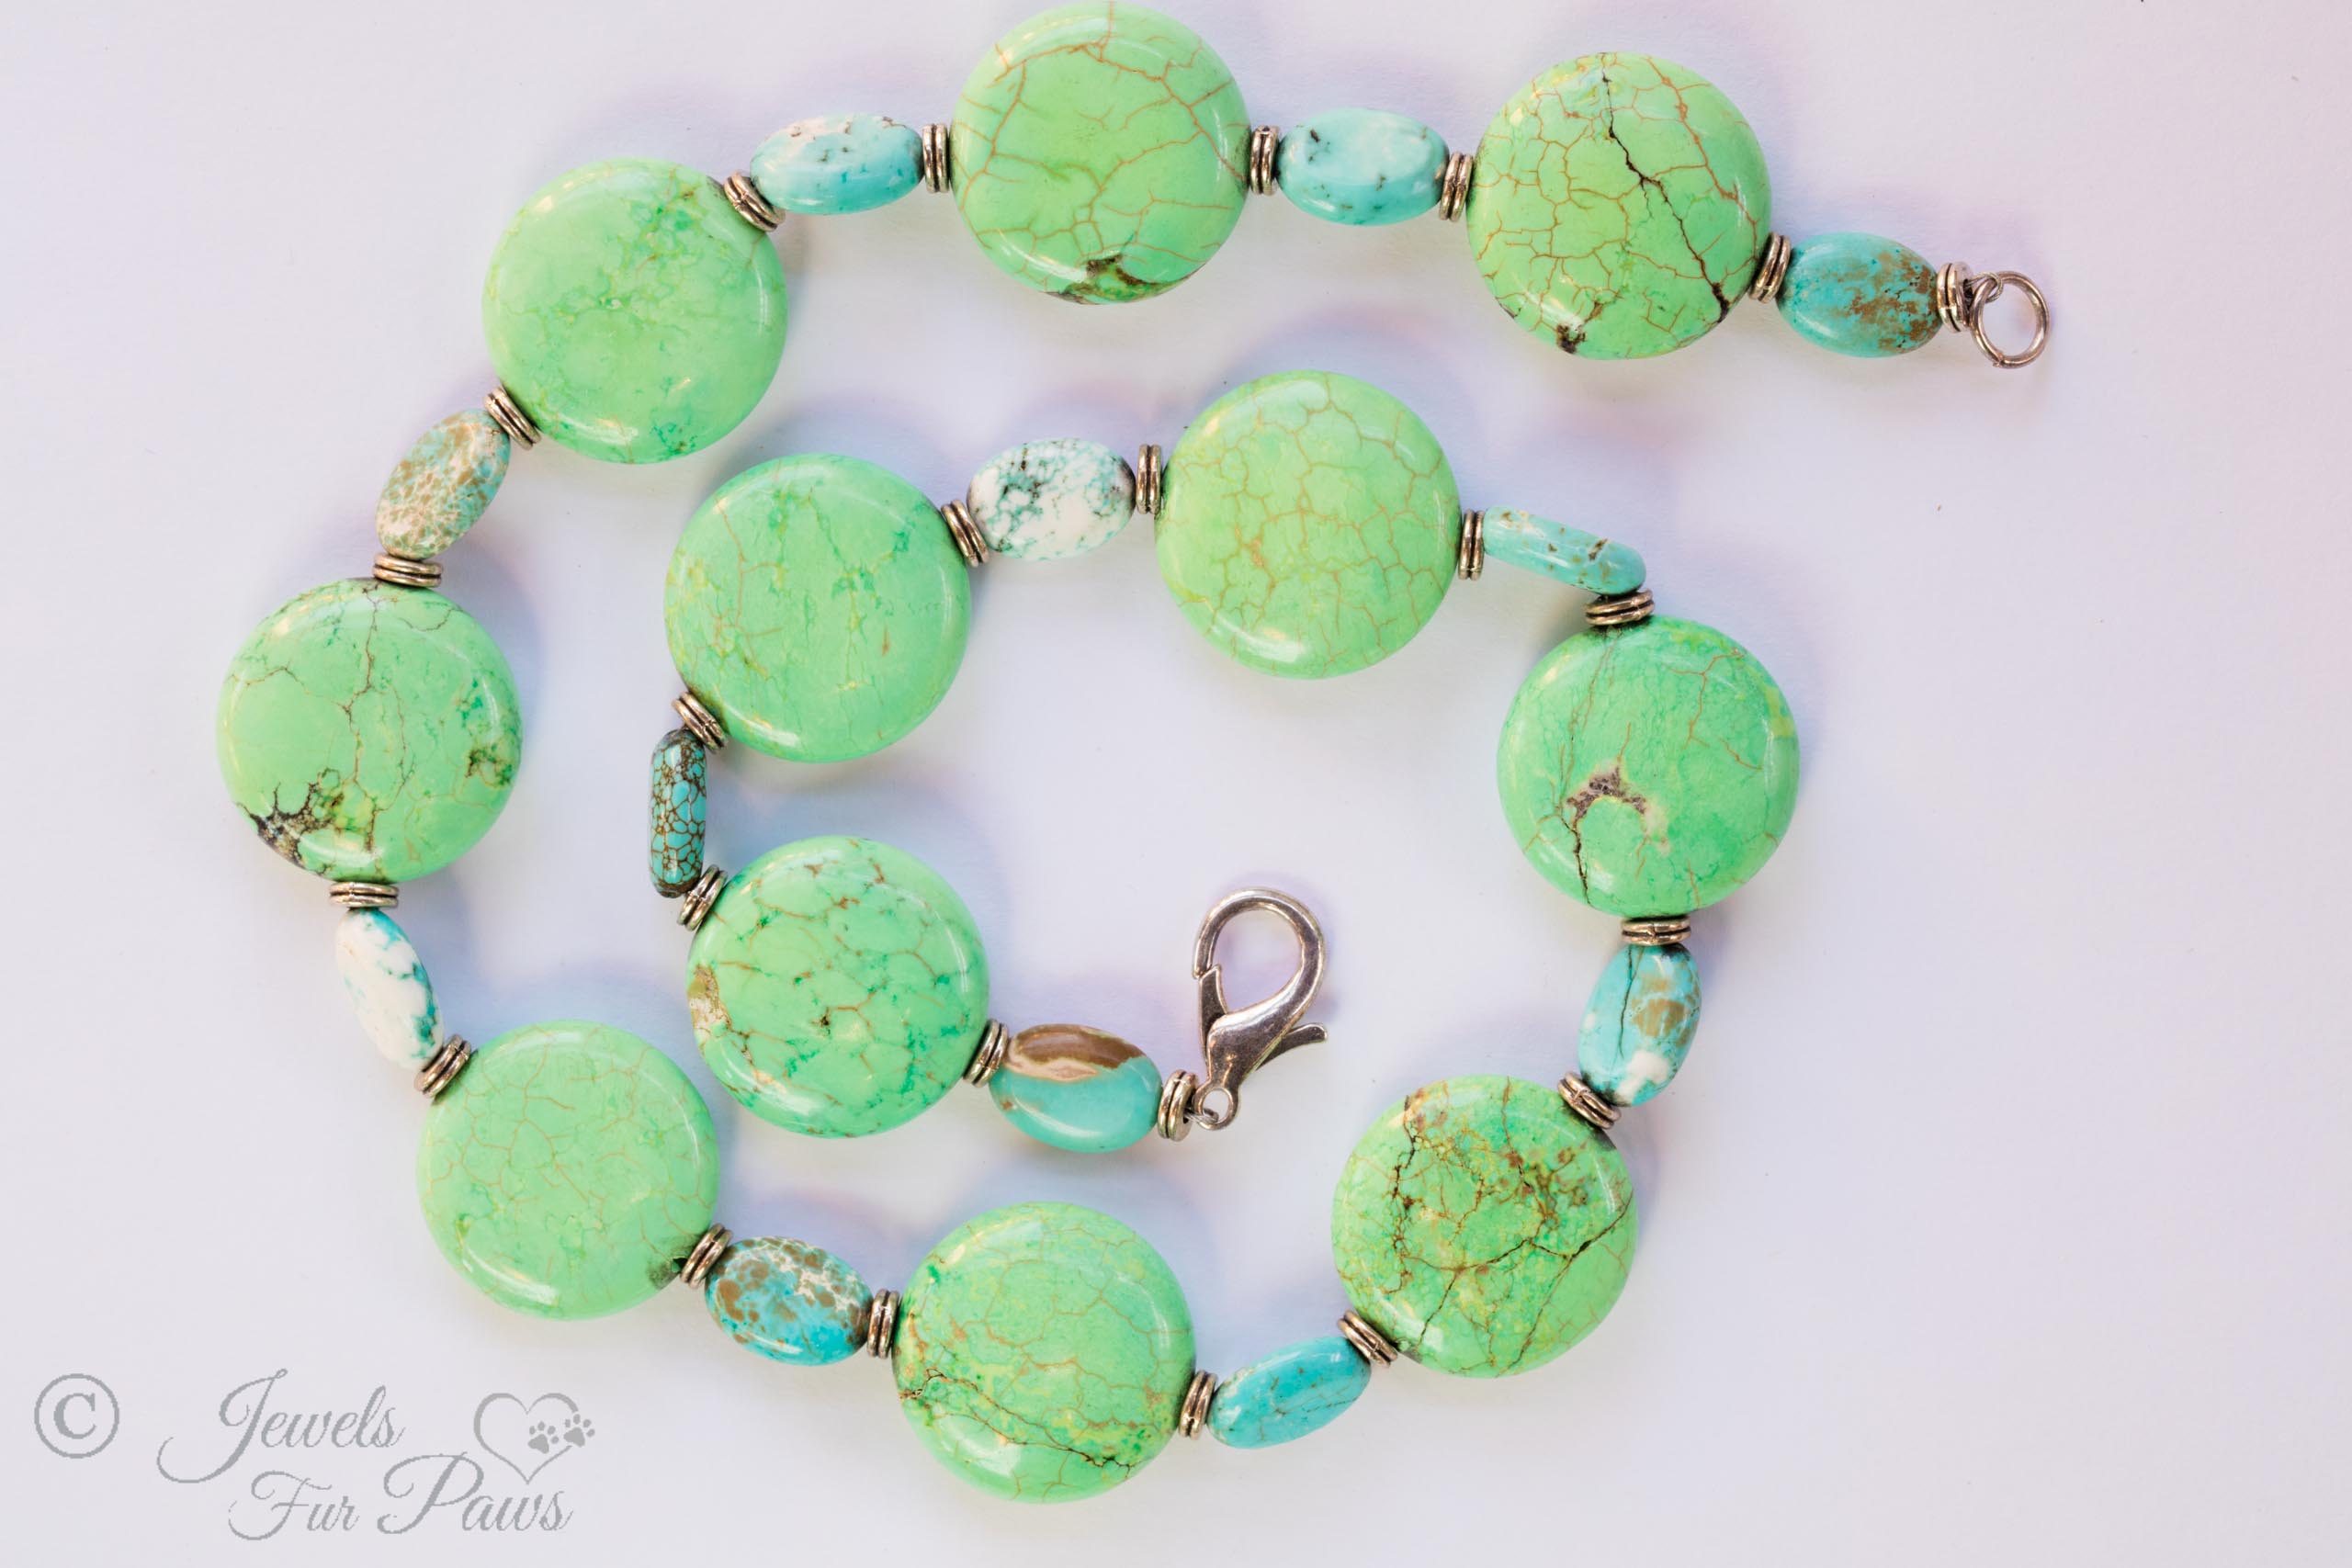 Green Turquoise necklace with blue turquoise spacers on white background